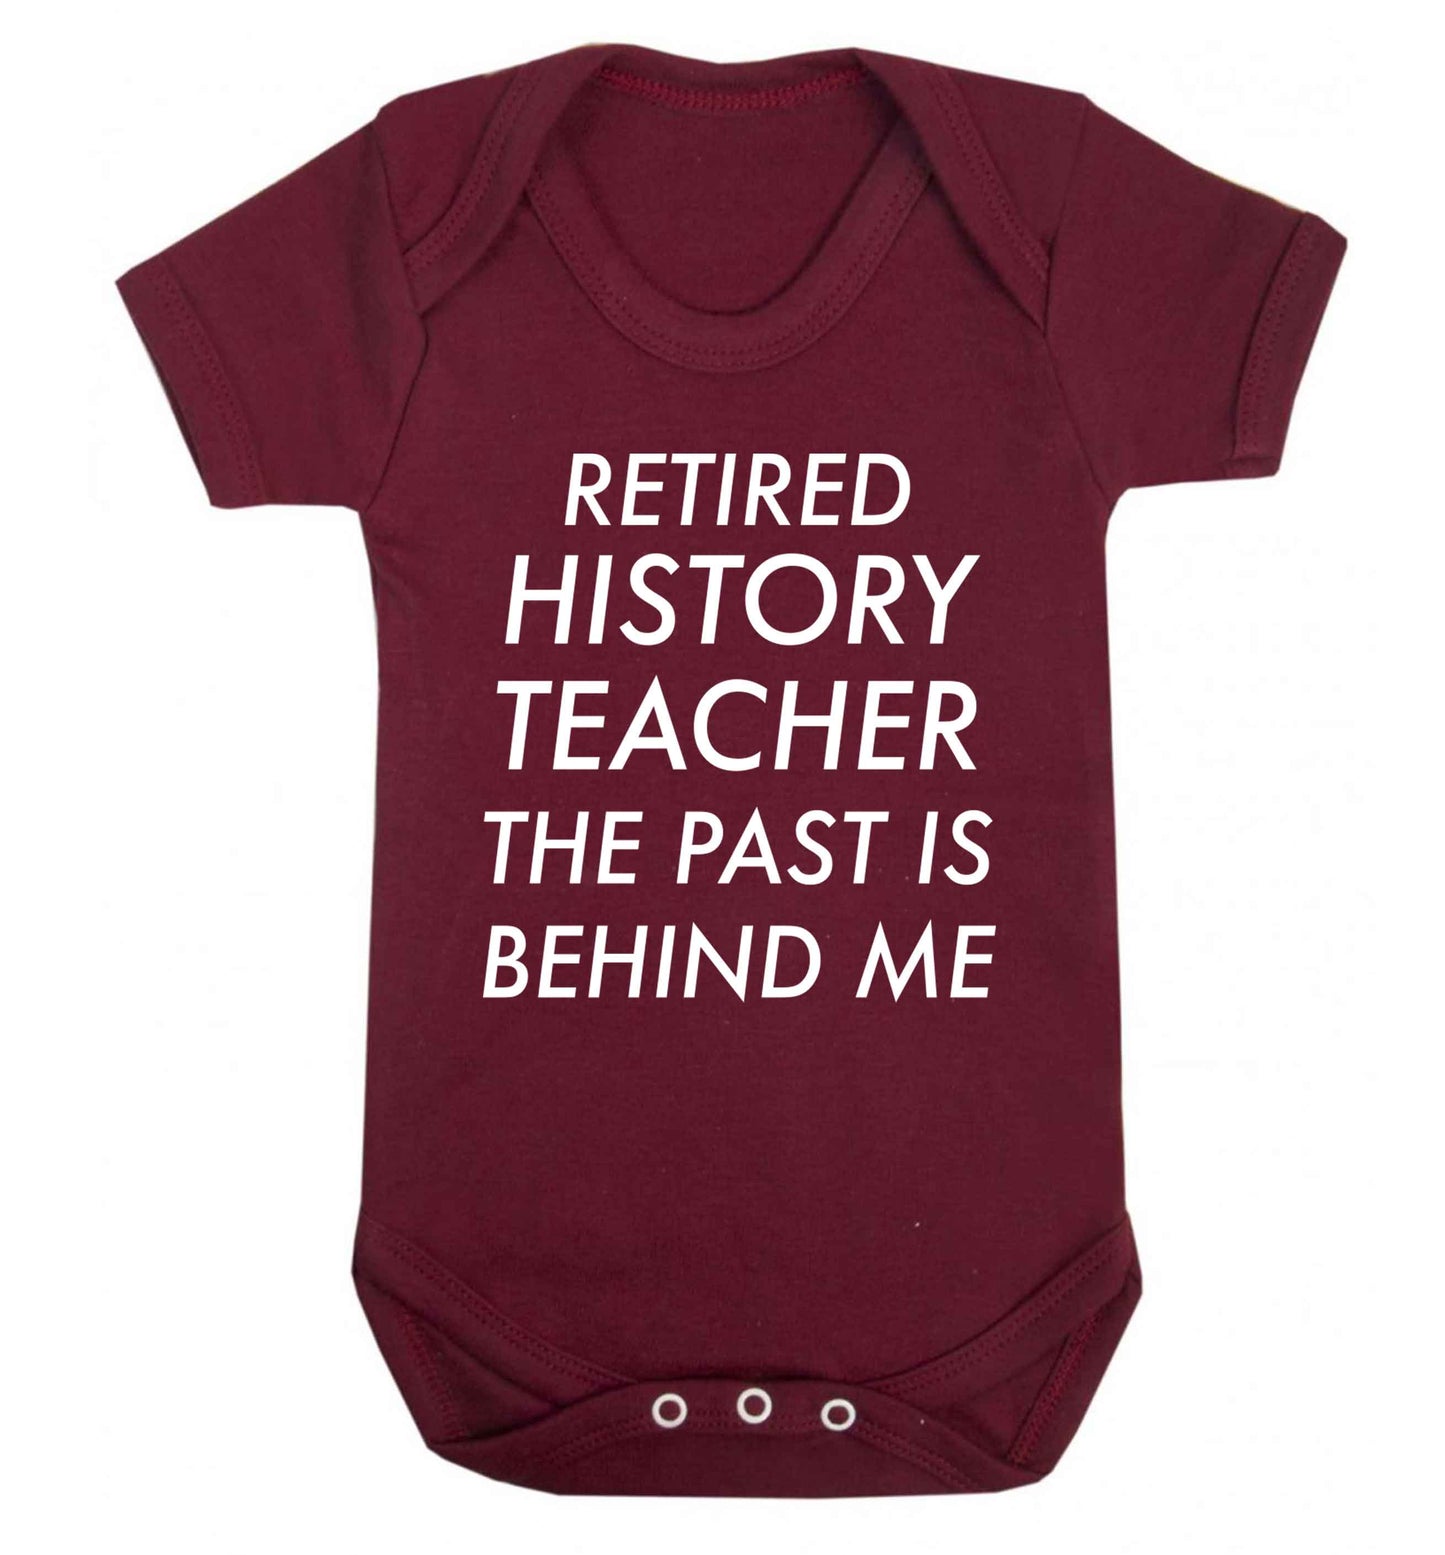 Retired history teacher the past is behind me Baby Vest maroon 18-24 months